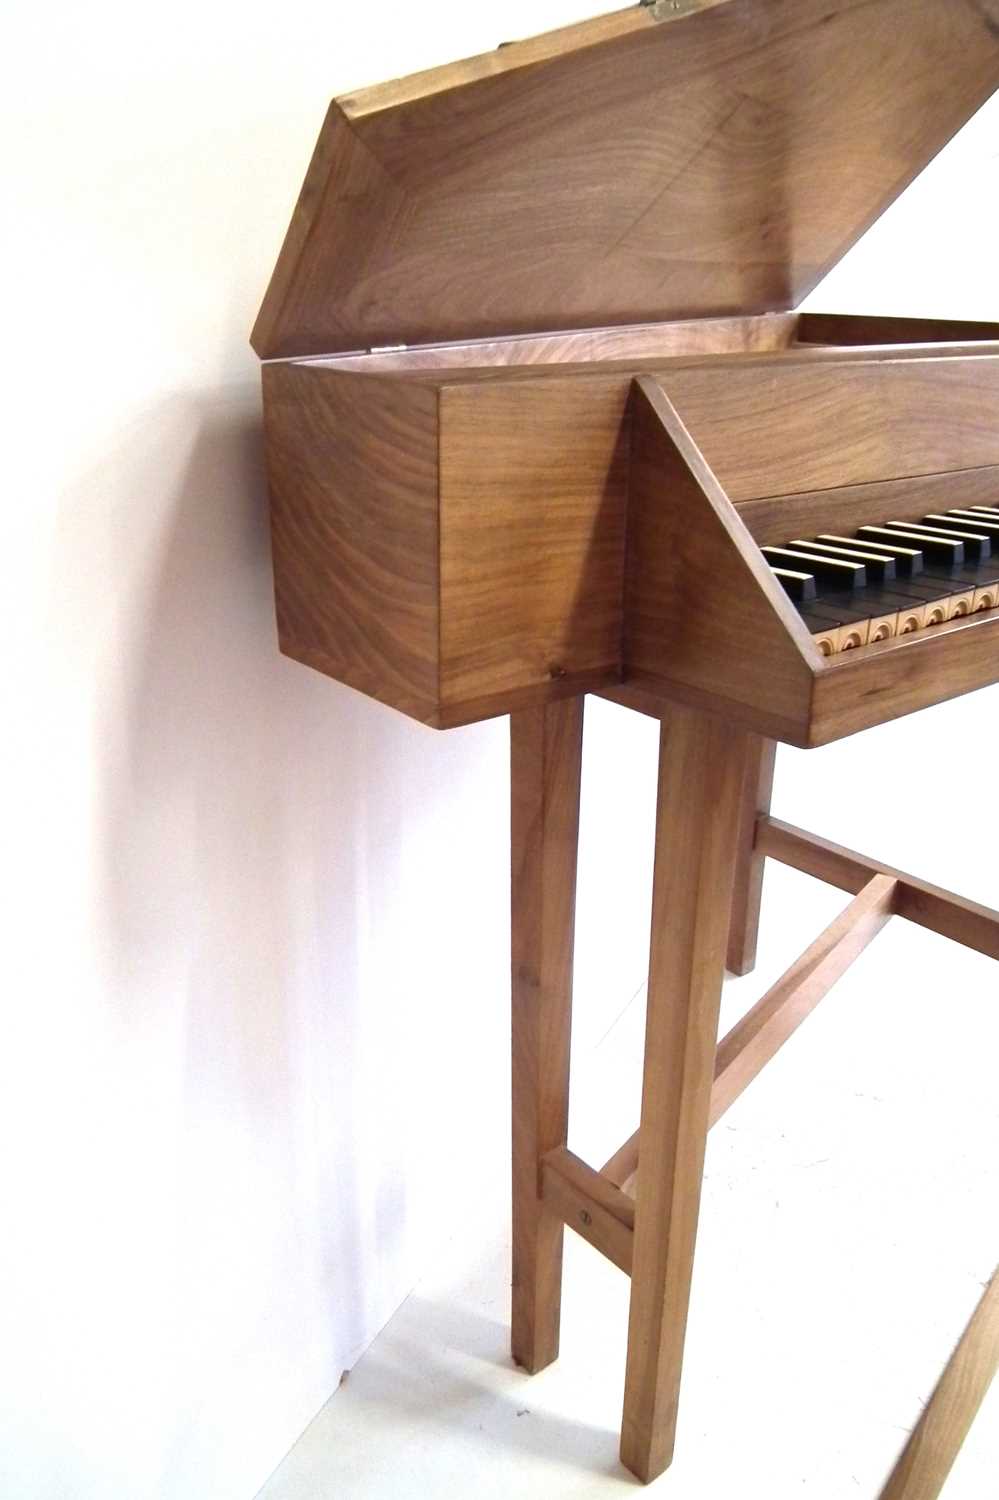 Triangular spinet by John Storr built from a kit, walnut case with ebony and ivory faced keys 115cm - Image 7 of 9